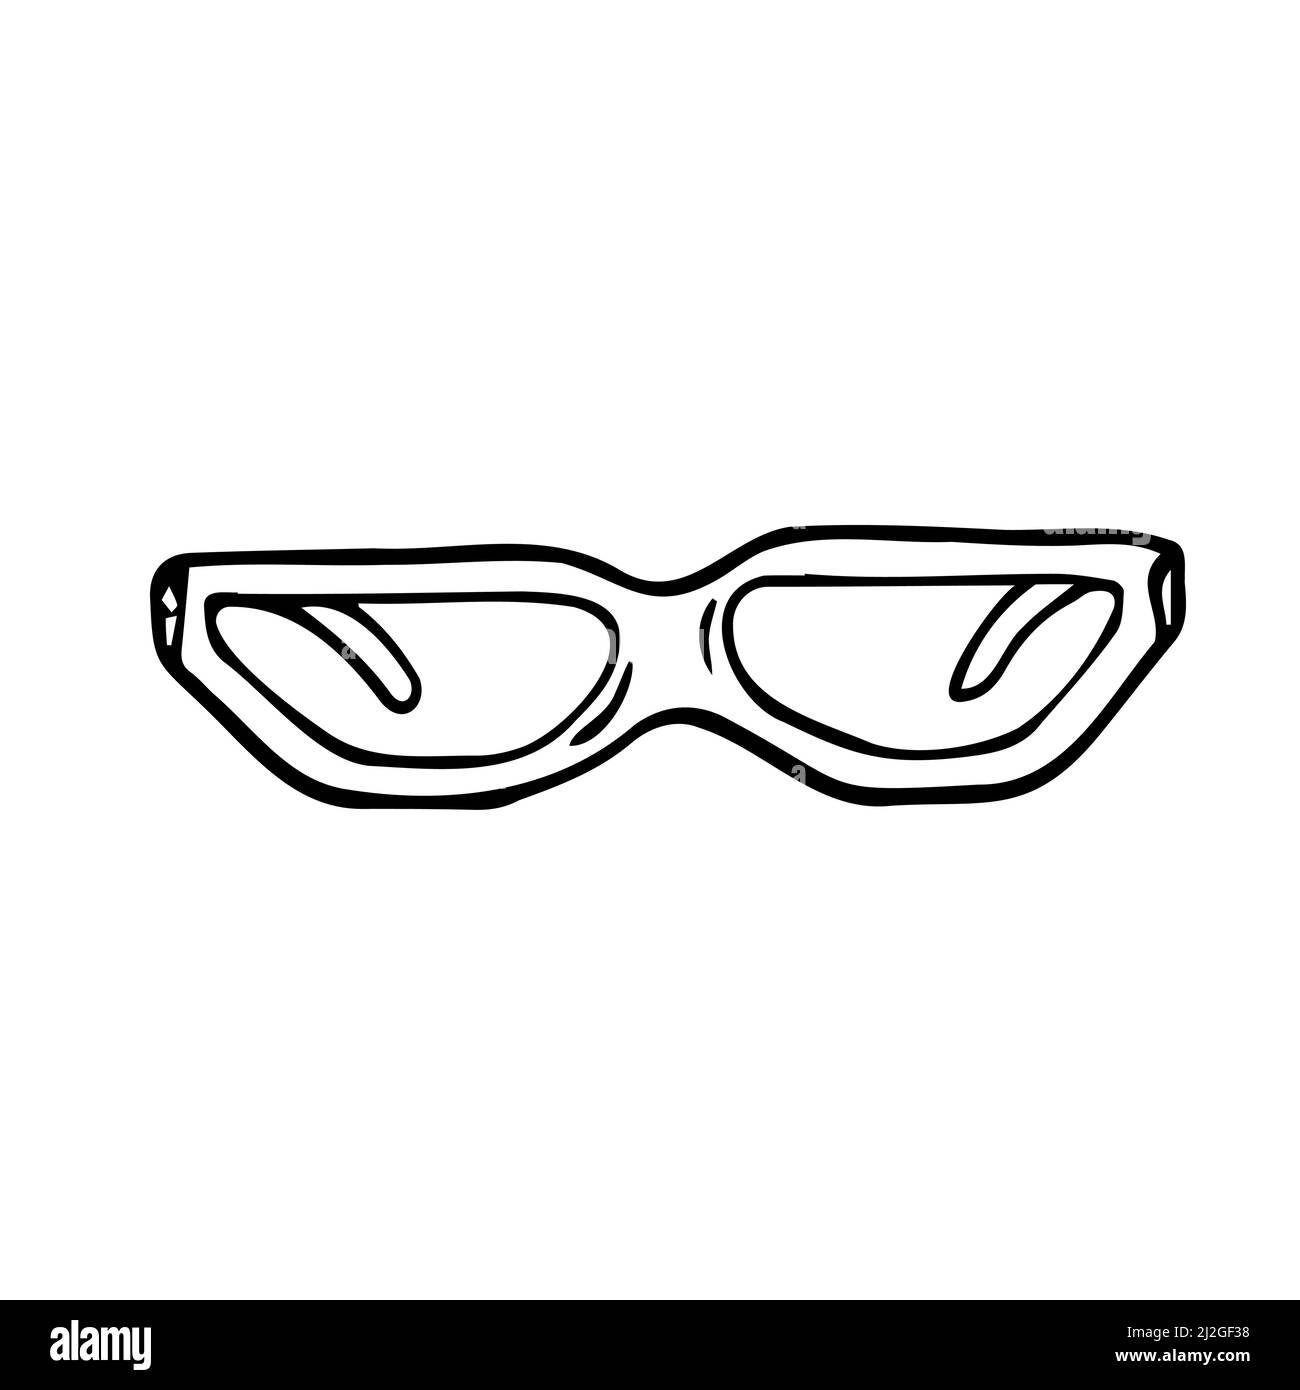 Glasses doodle icon. Vector hand drawn illustration. Isolated on white Stock Vector